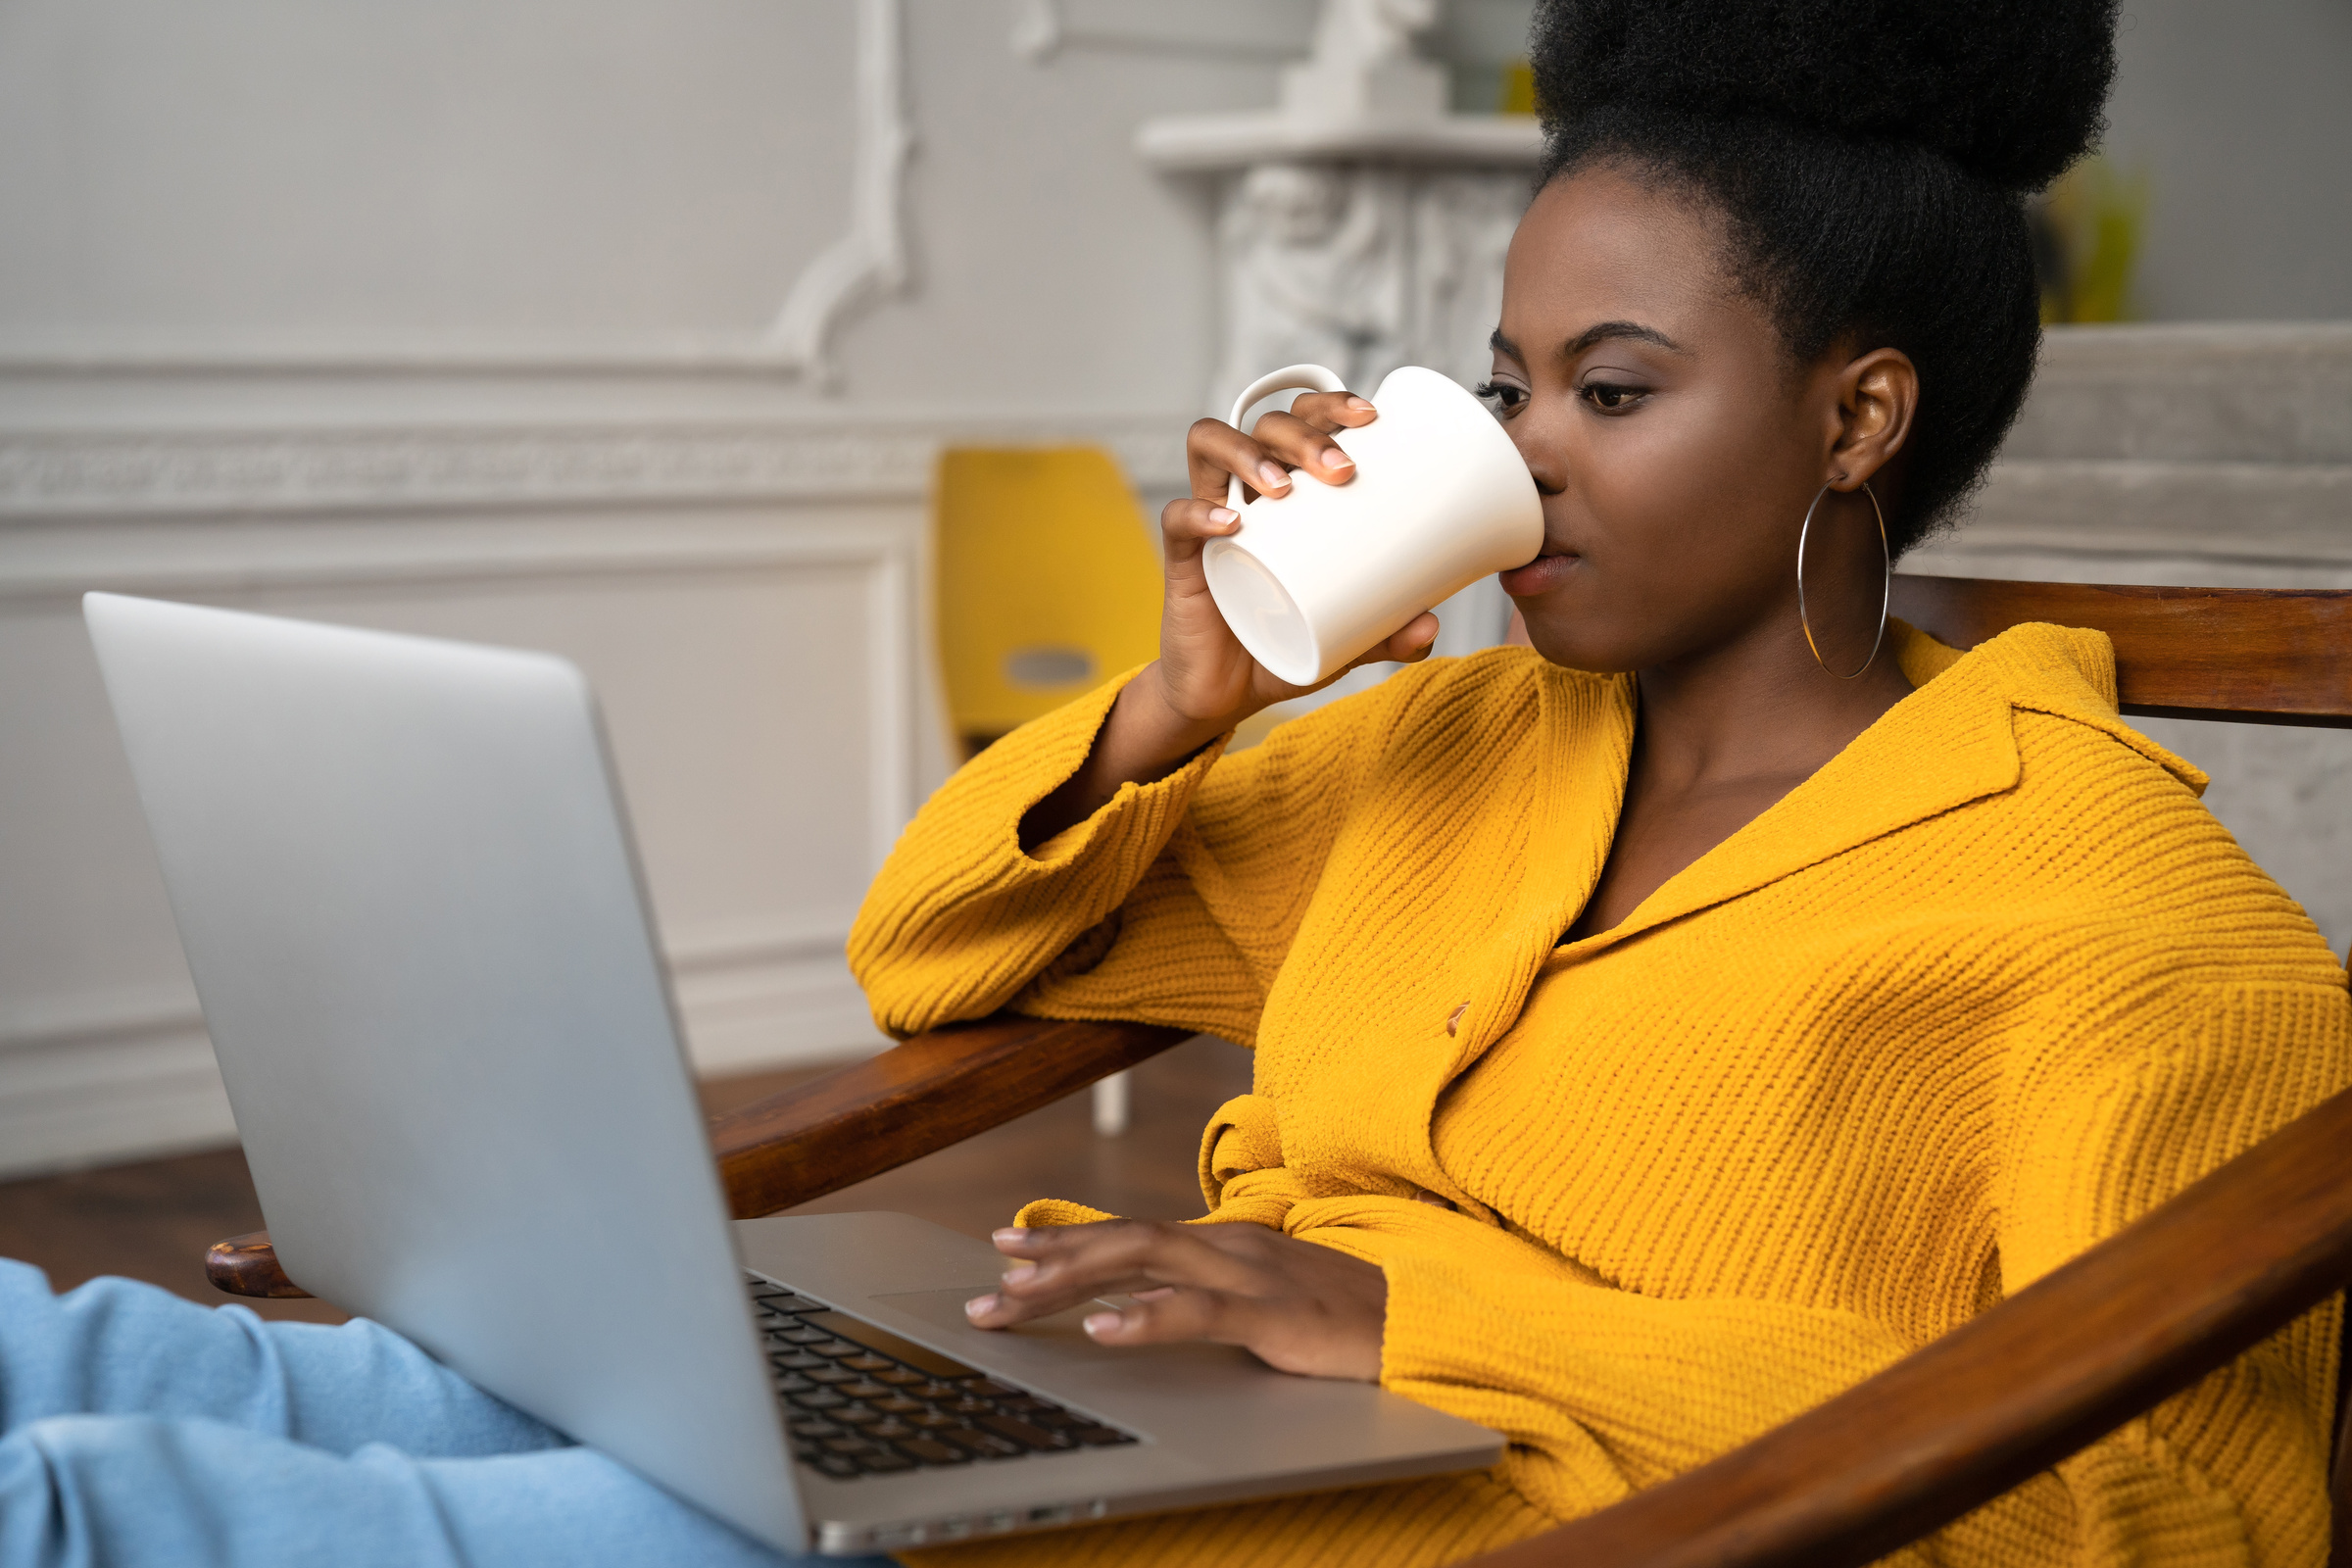 Woman Drinking Coffee While Using a Laptop